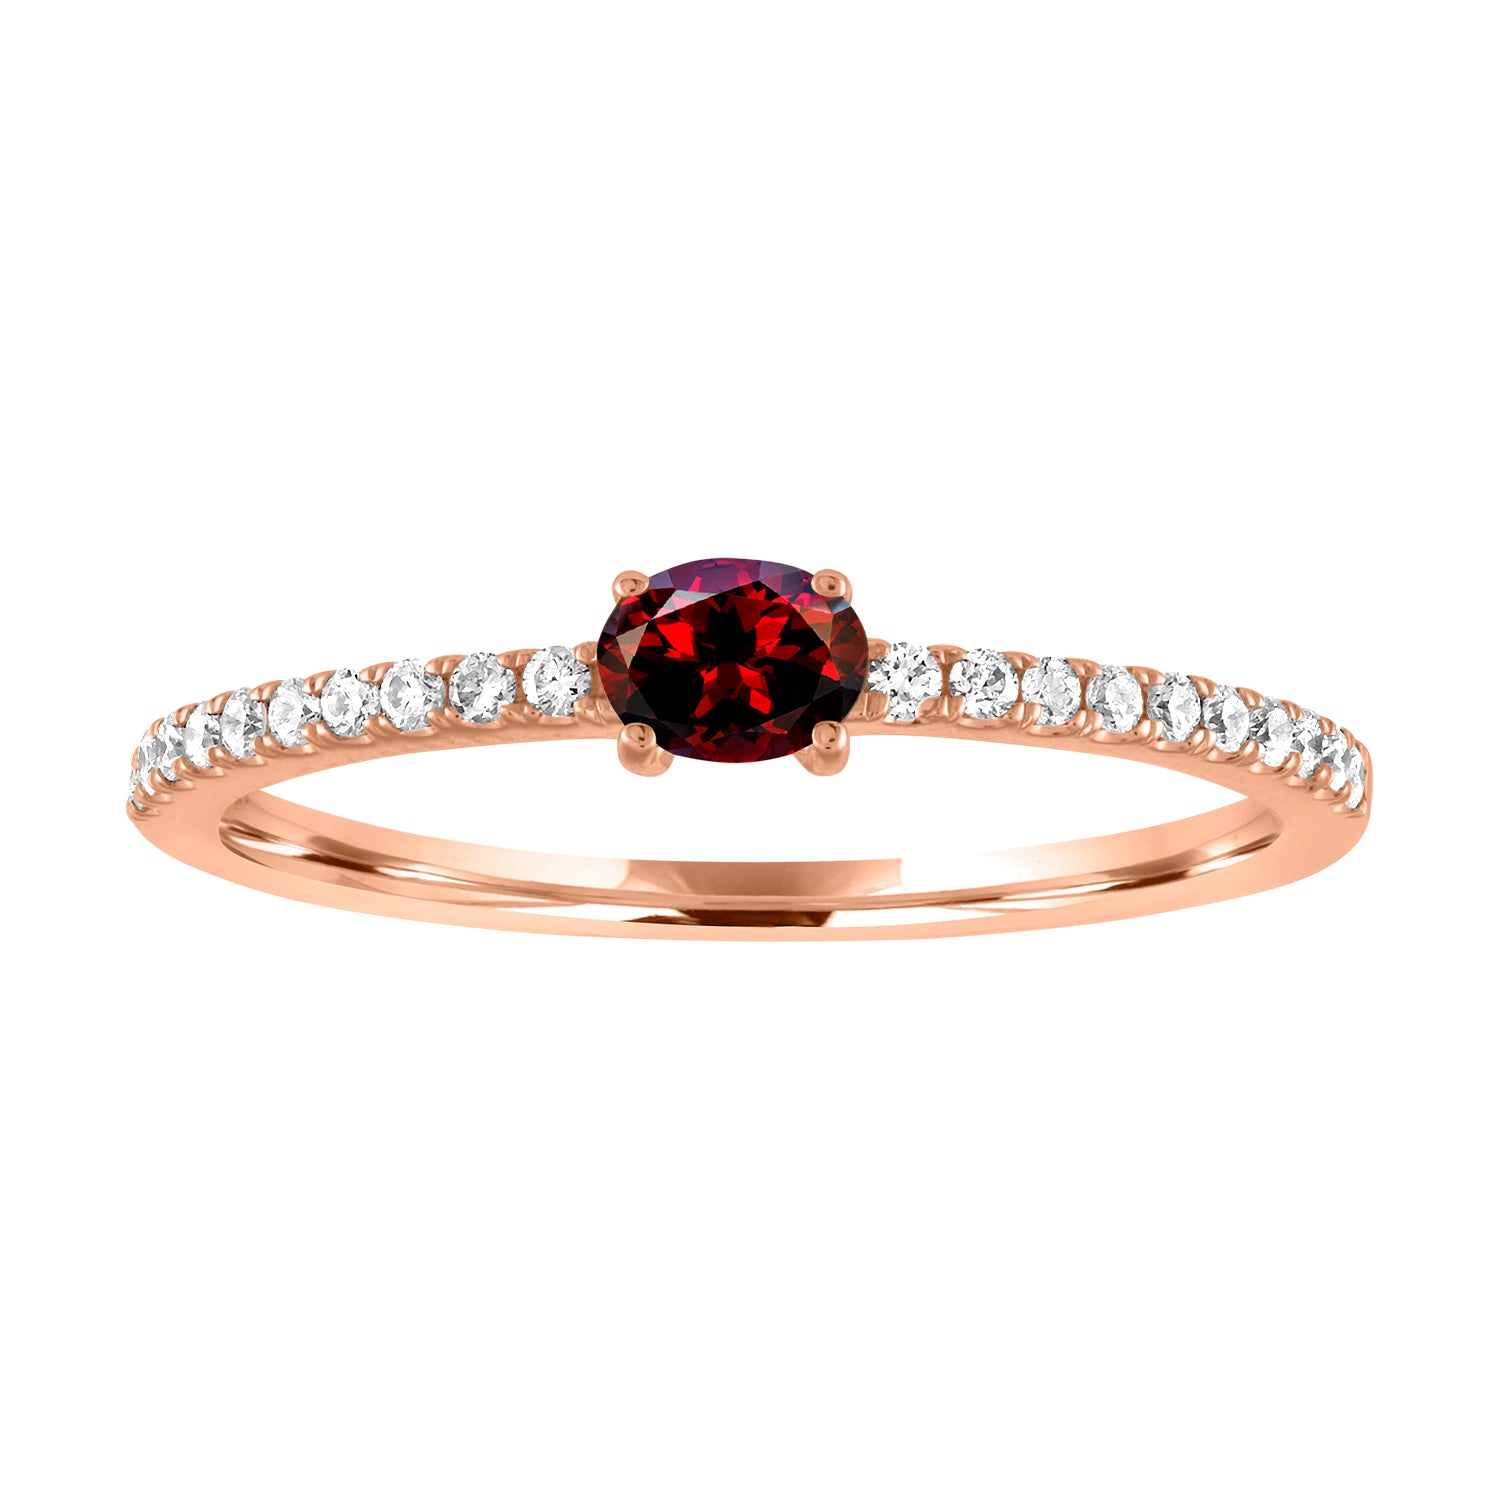 Rose gold skinny band with an oval garnet in the center and round diamonds along the shank.